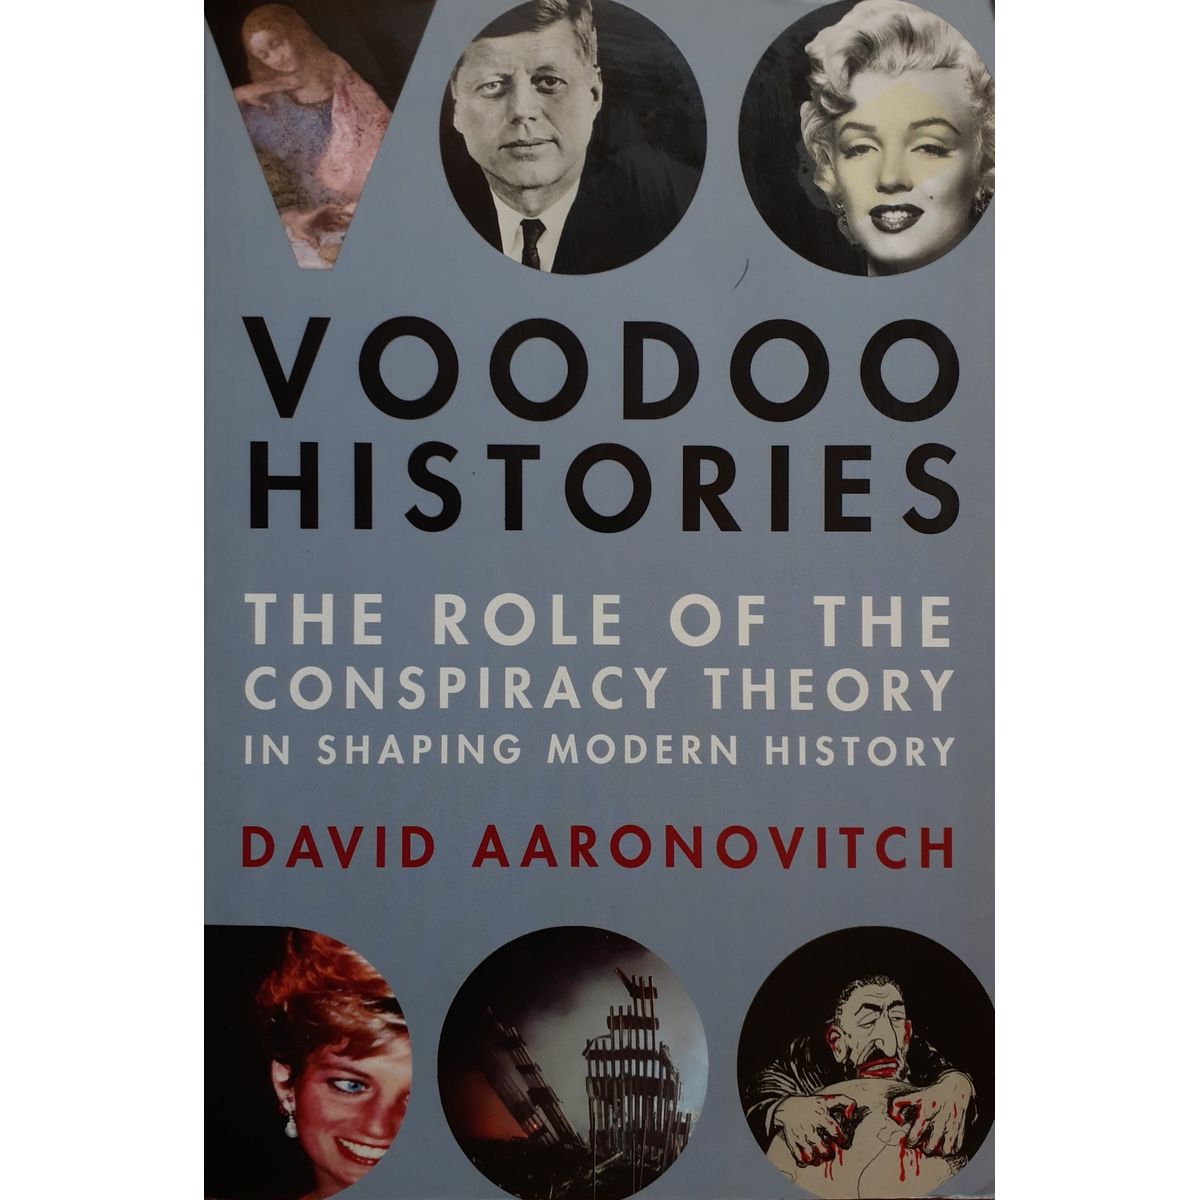 ISBN: 9780224089876 / 0224089870 - Voodoo Histories: The Role of the Conspiracy Theory in Shaping Modern History by David Aaronovitch [2009]